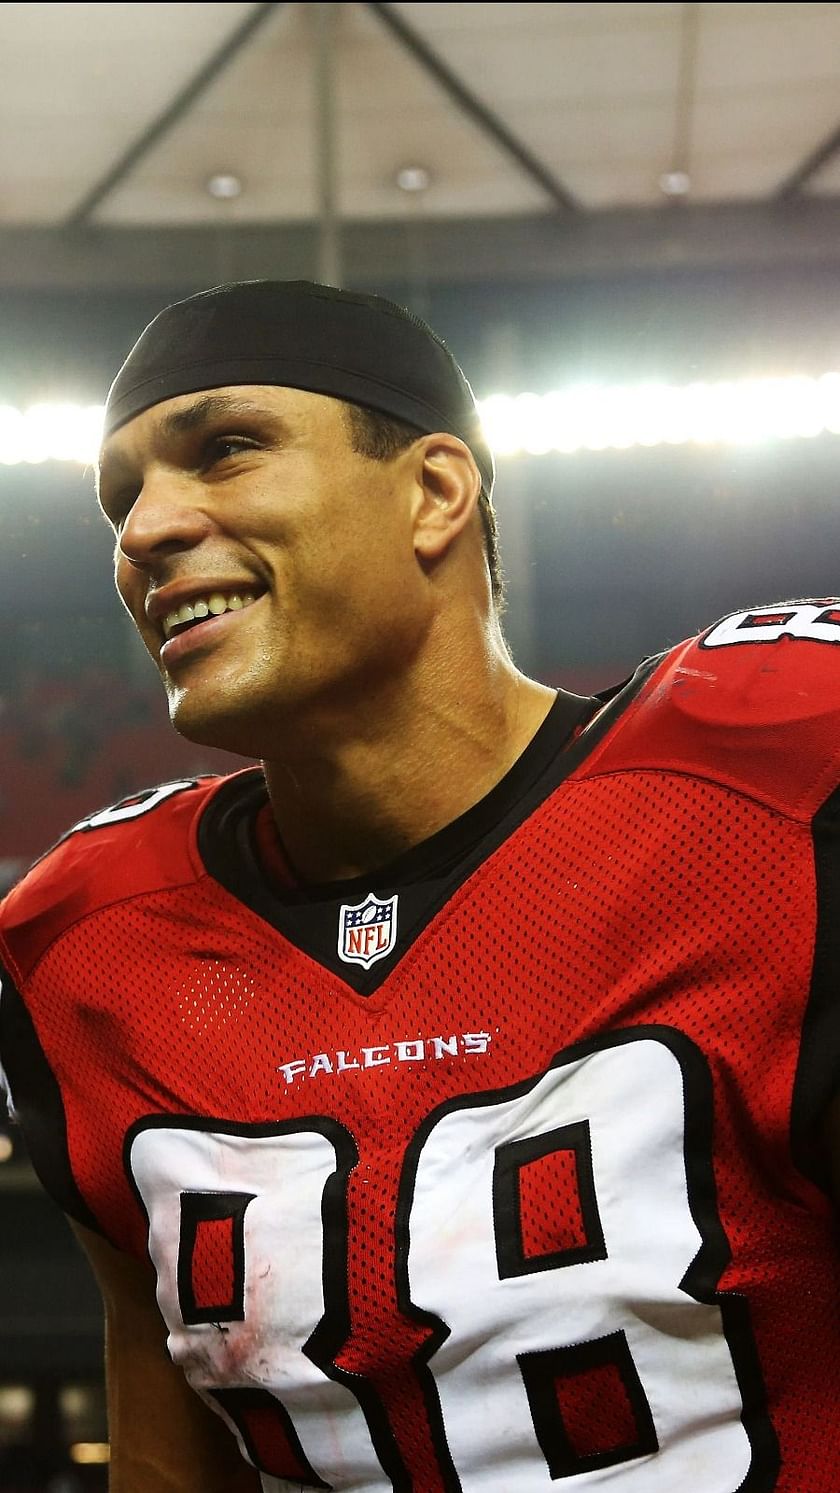 Former Falcons great Tony Gonzalez to be inducted into Pro